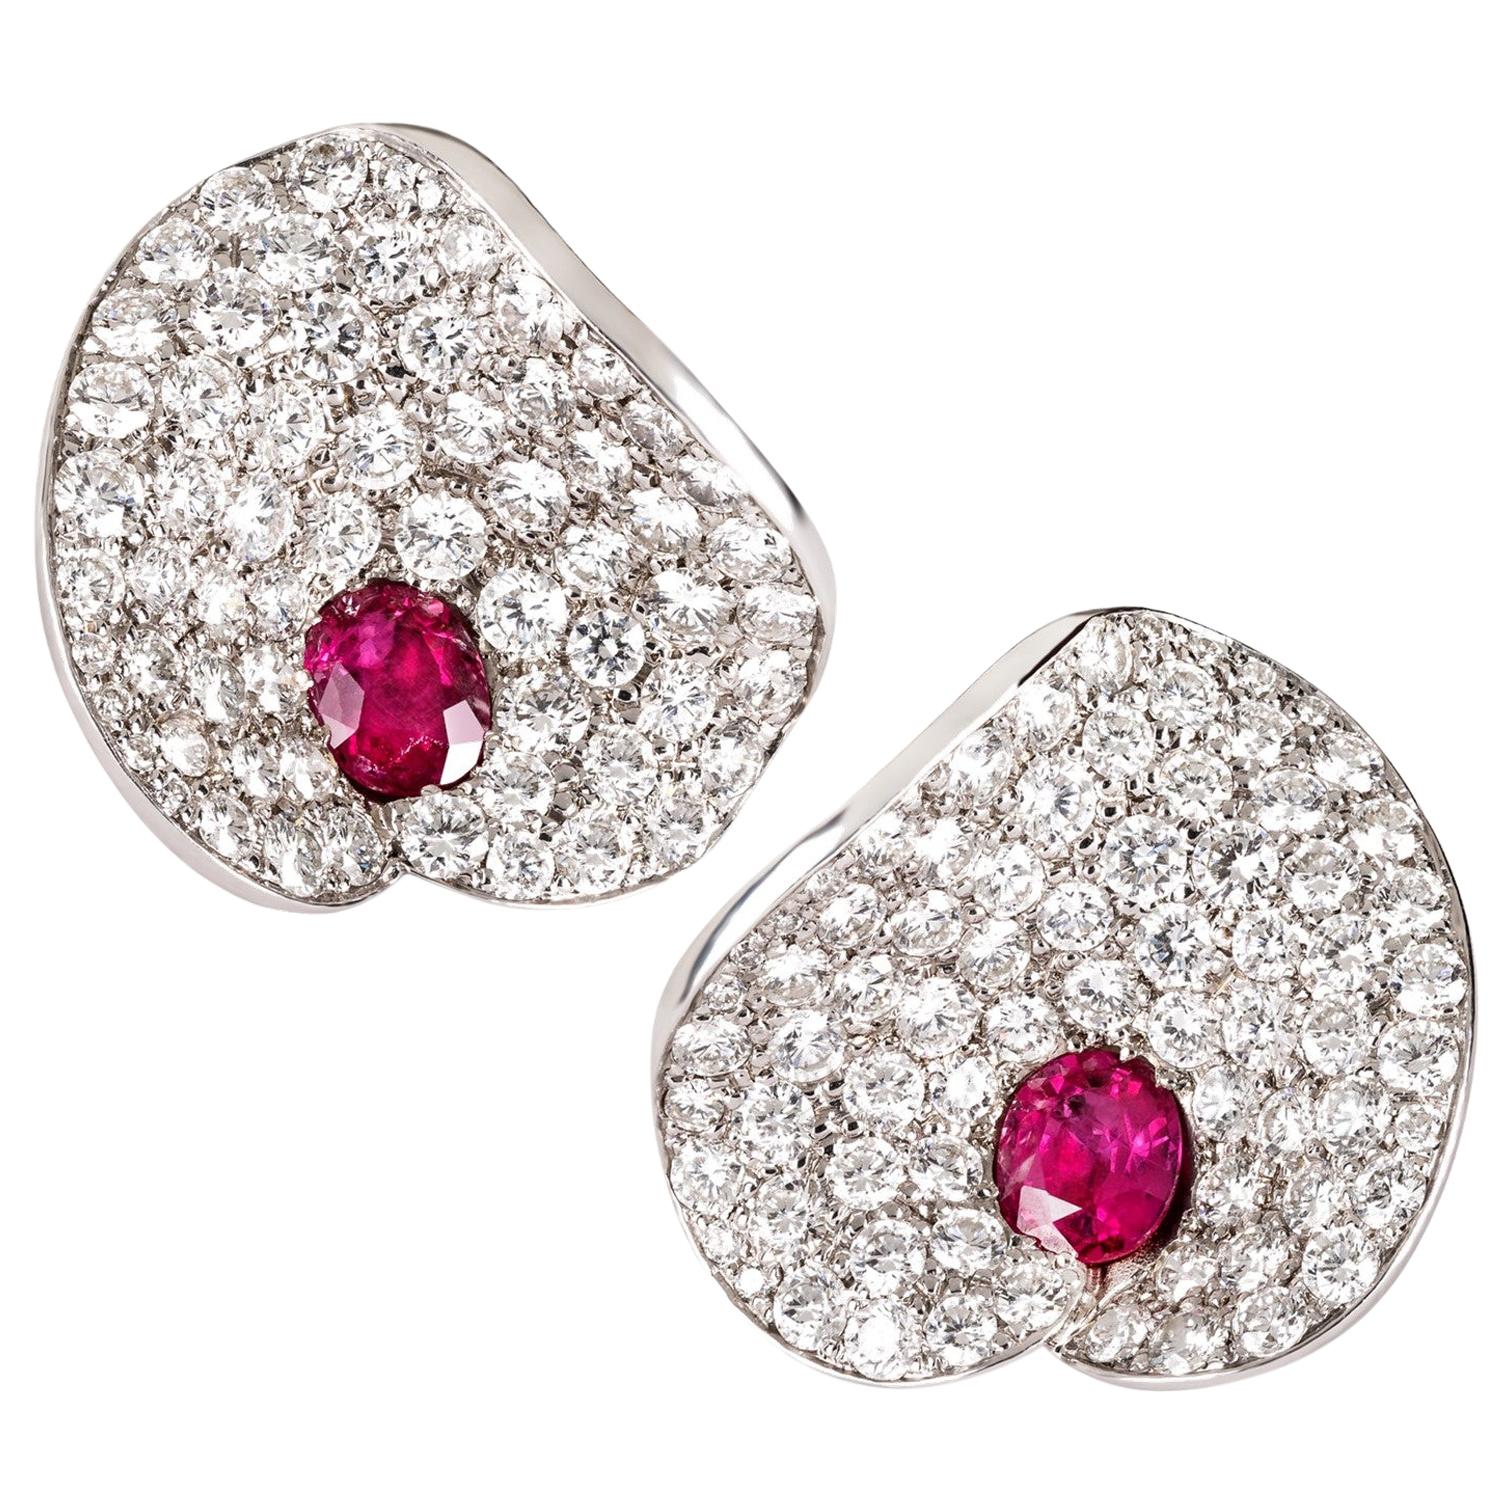 Rosior one-off Ruby and Diamond "Petal" Earrings set in White Gold